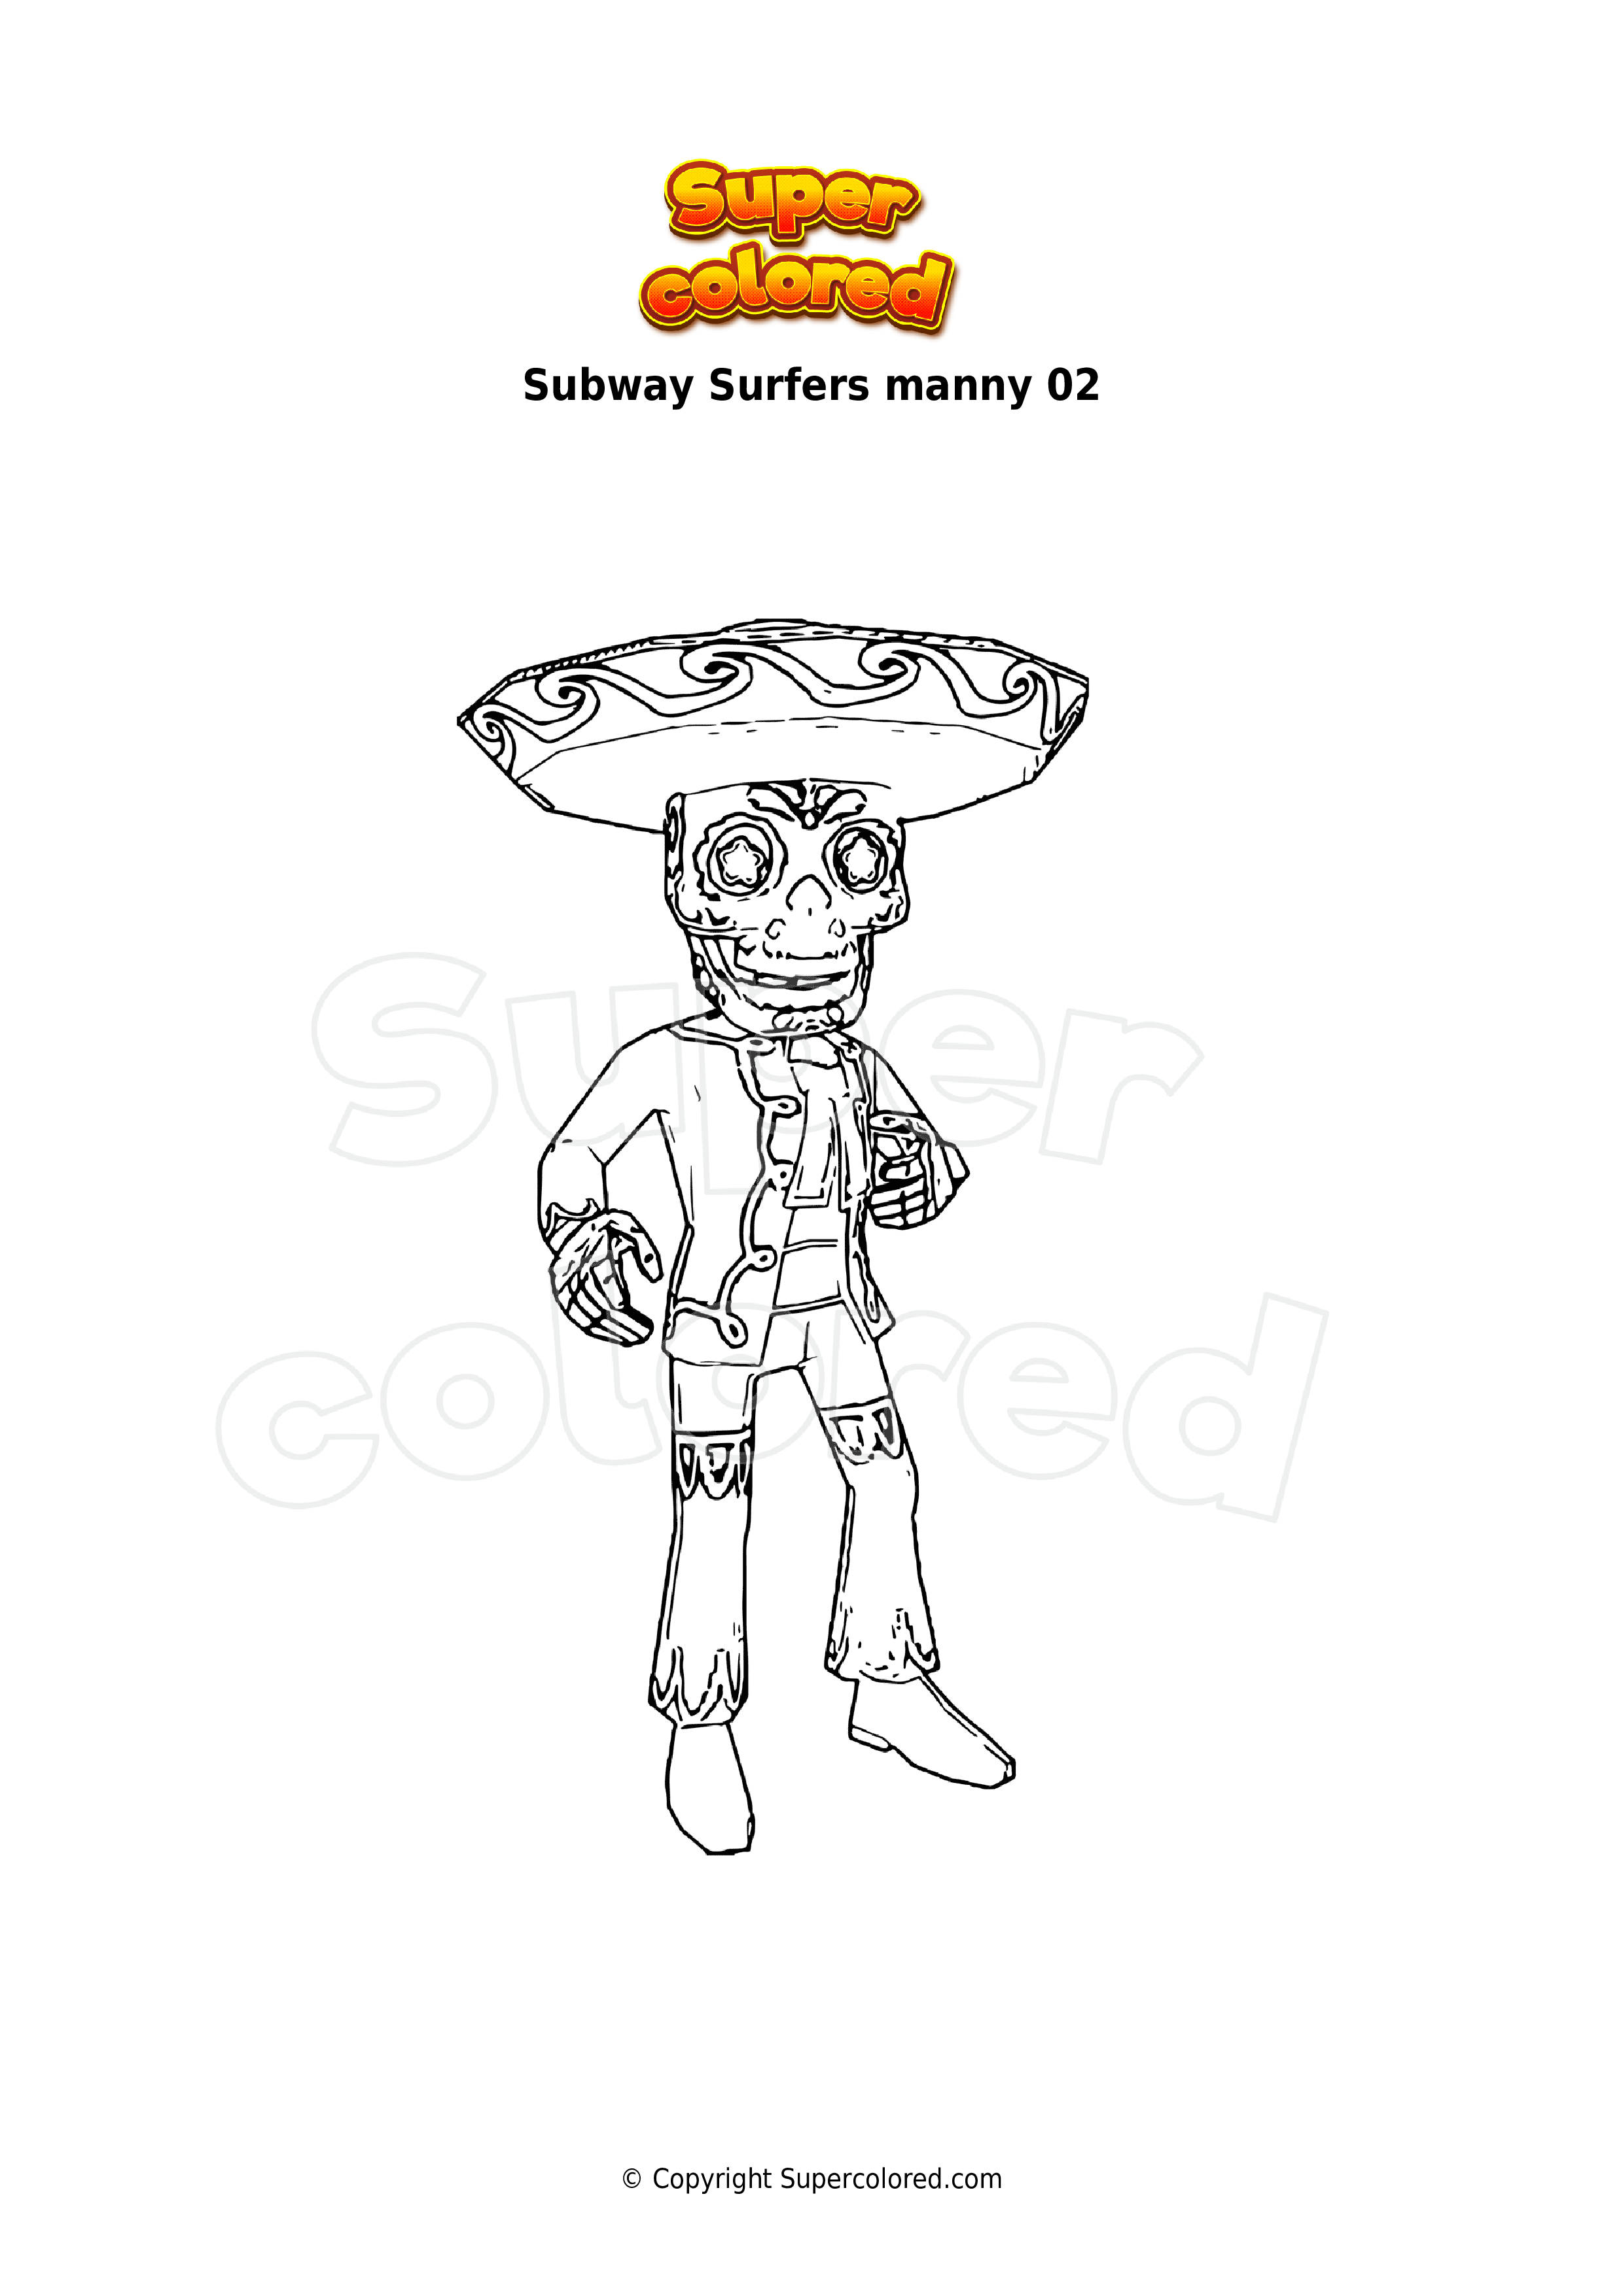 Coloring page Subway Surfers manny 02 - Supercolored.com